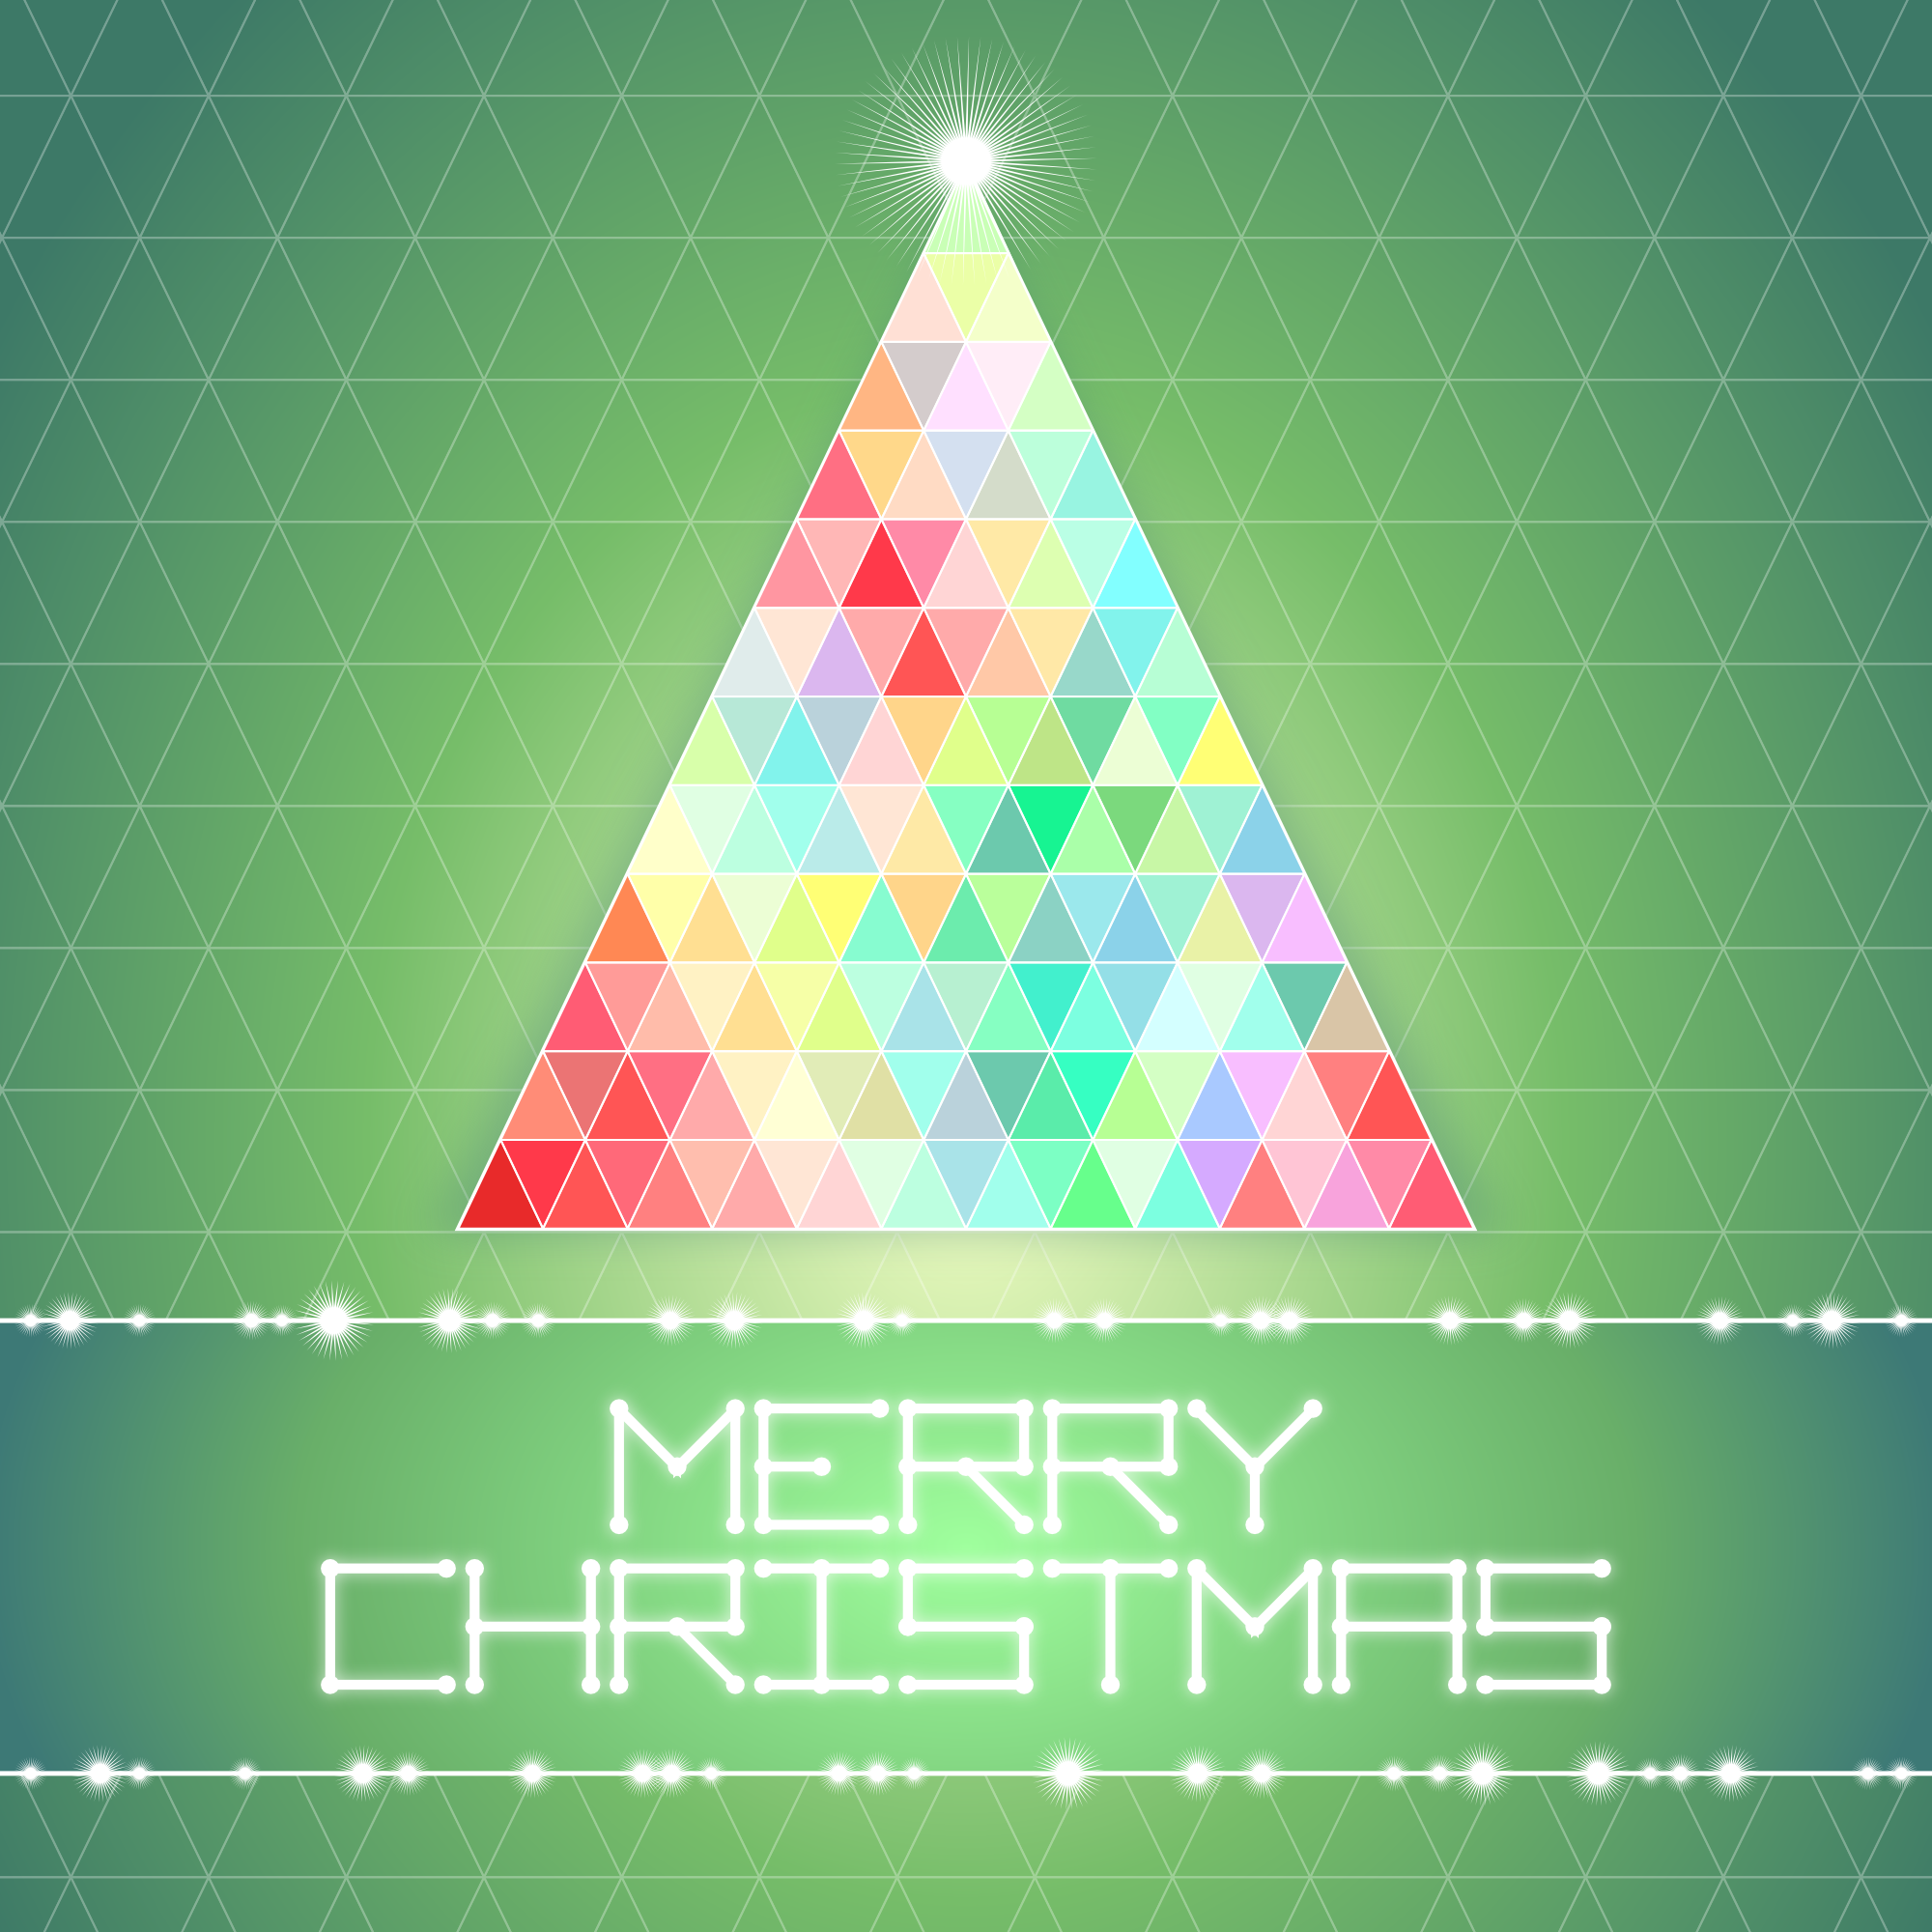 File:Merry Christmas.png